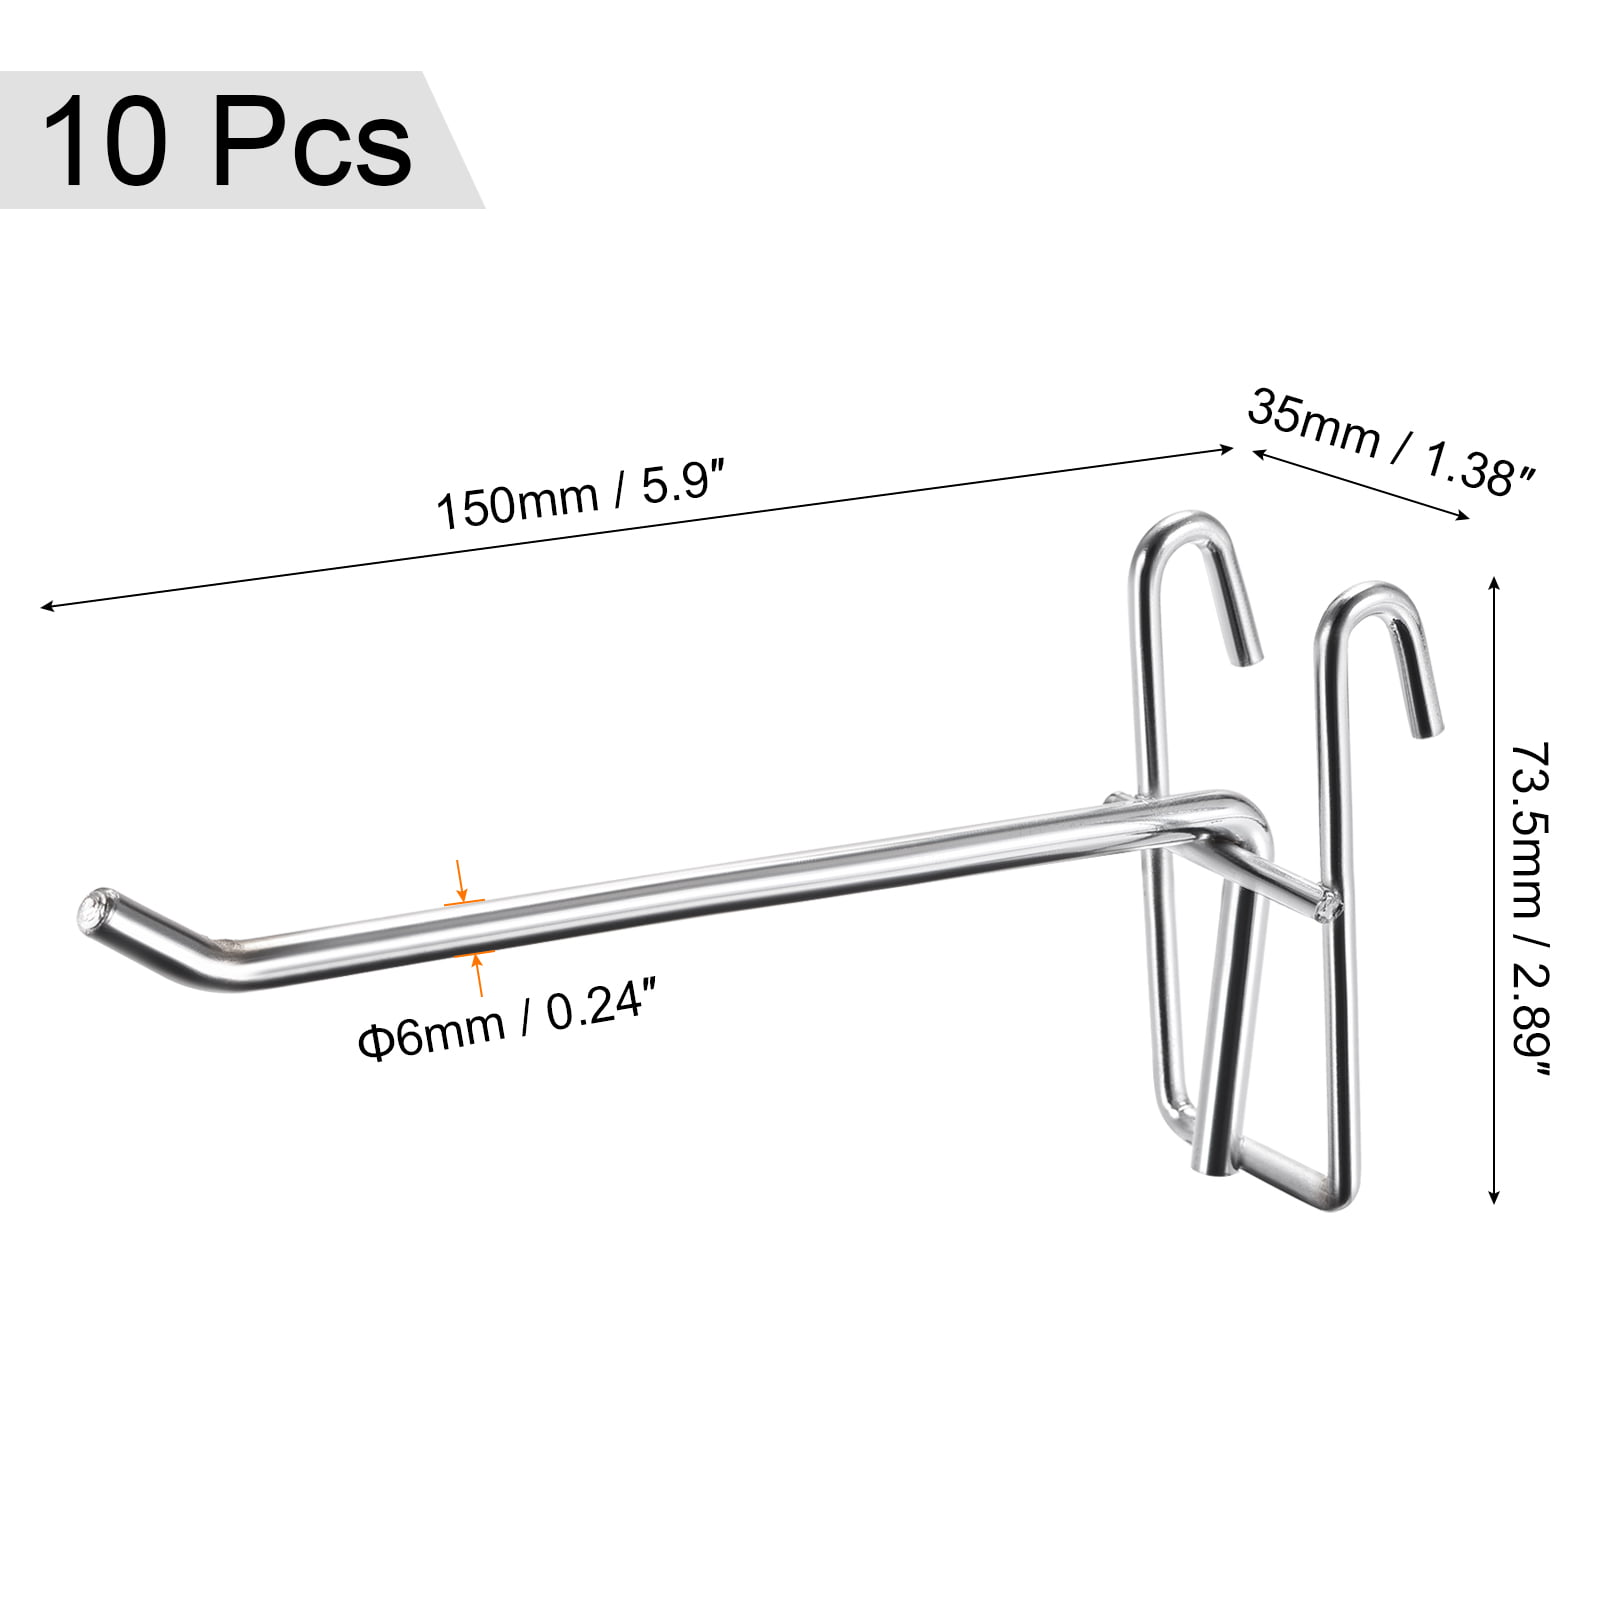 10Pcs Stainless Steel Wall Display Hooks for Coat Shop Slatwall Panel 10 150MM 